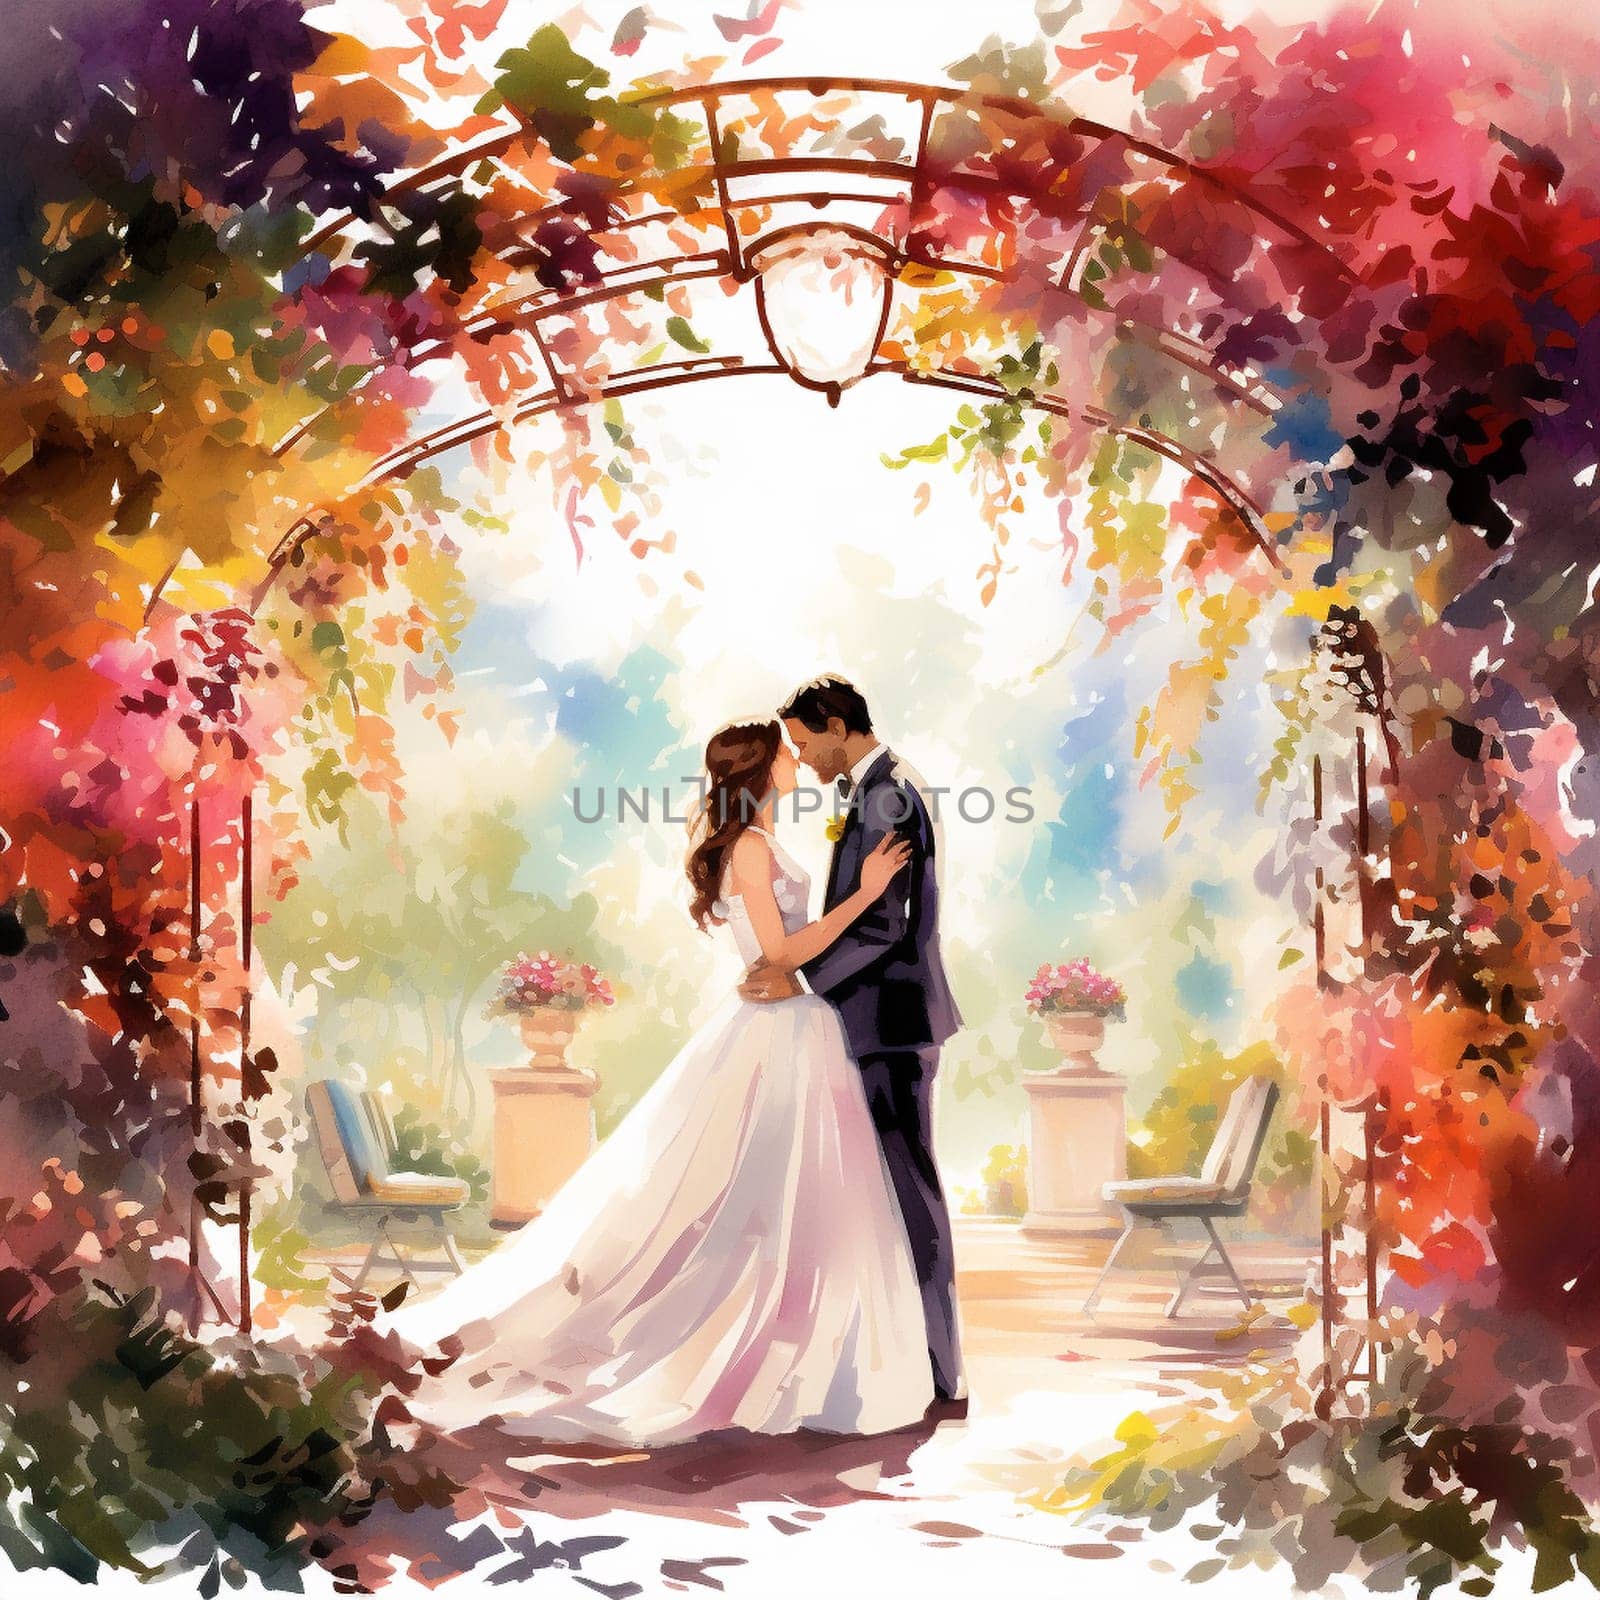 Immerse yourself in the beauty of this vibrant watercolor painting that showcases a couple exchanging vows in a stunning garden setting. The bride is wearing a flowing white dress adorned with delicate flowers, while the groom is dressed in a dapper suit. They stand beneath a blossoming arch entwined with greenery and colorful flowers. The sunlight filters through the tree canopy, casting a warm glow on the scene. In the background, witnesses and loved ones watch with teary-eyed joy as the couple exchanges their eternal promises, creating a deeply heartfelt and cherished moment captured in this radiant exchange of vows.